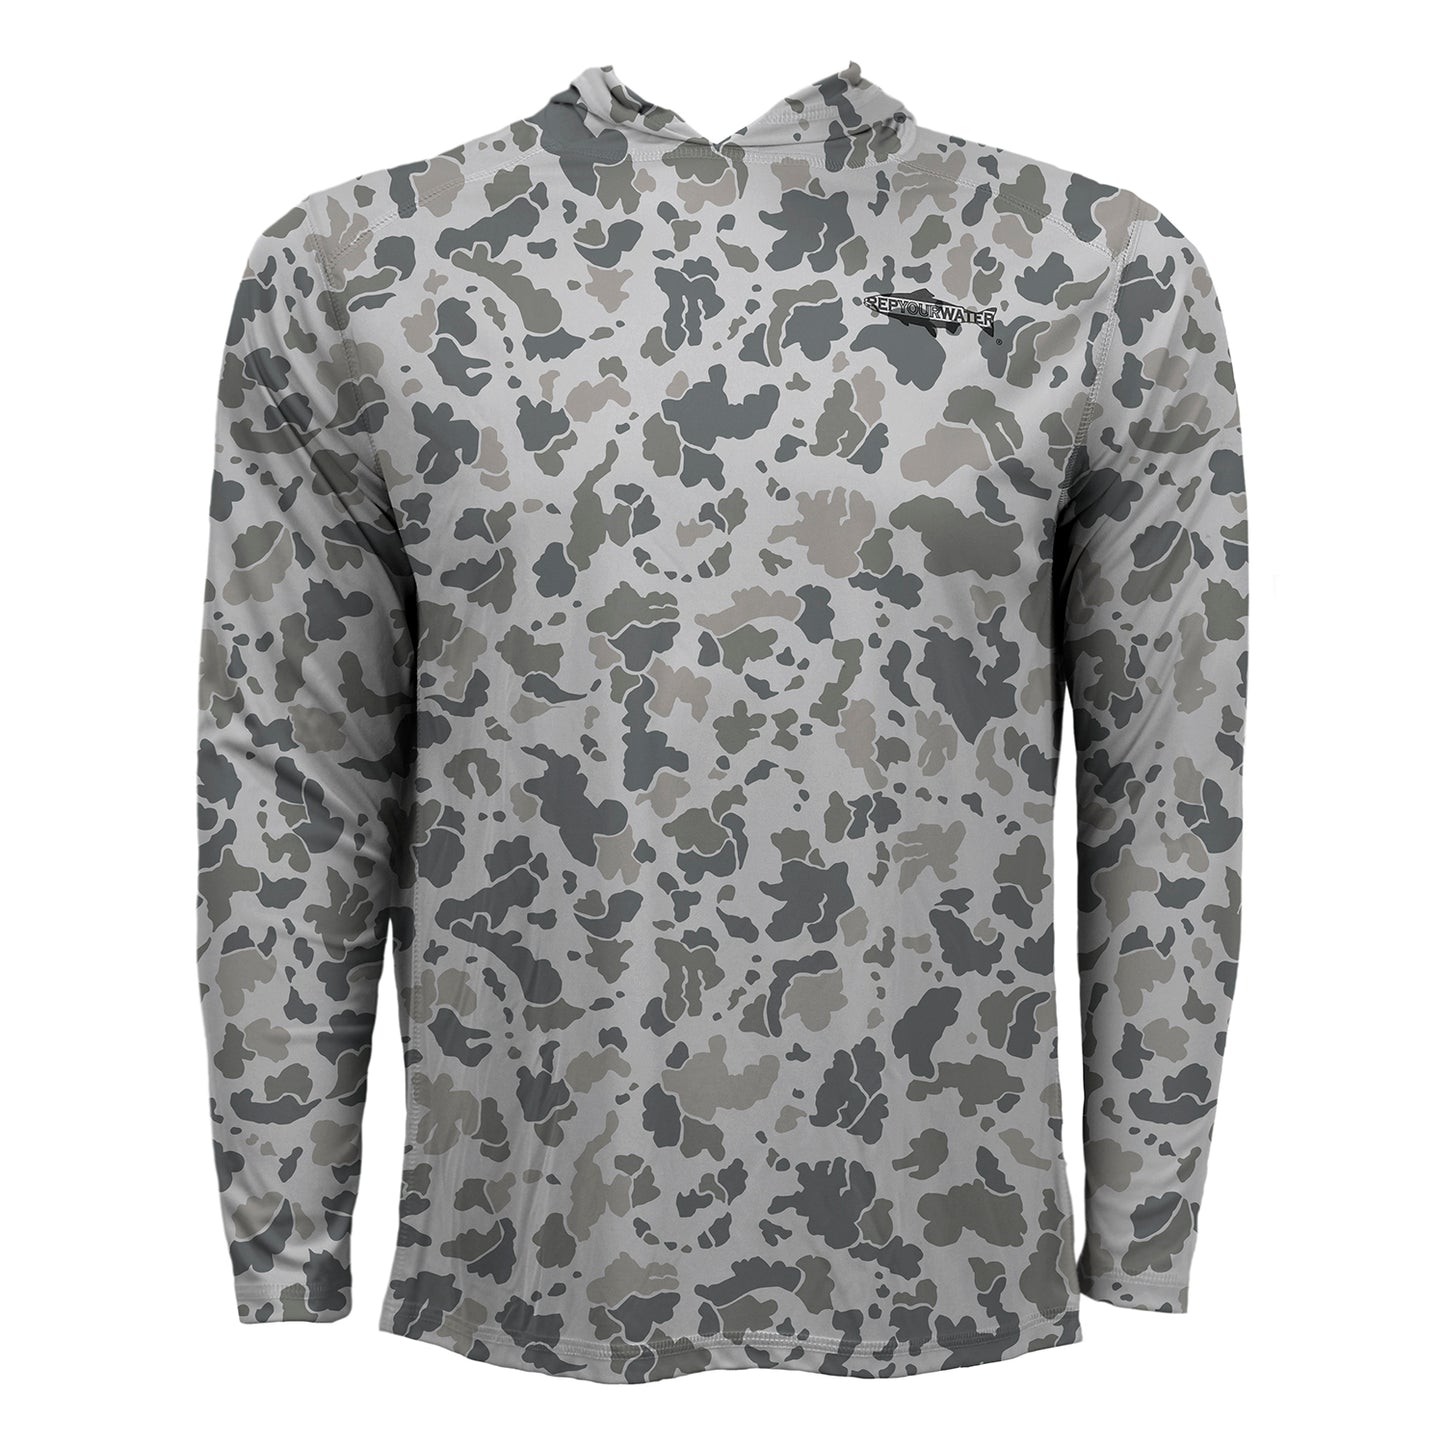  gray toned Camo printed long sleeve sun hoody with a black fish silhouette that reads Rep your water